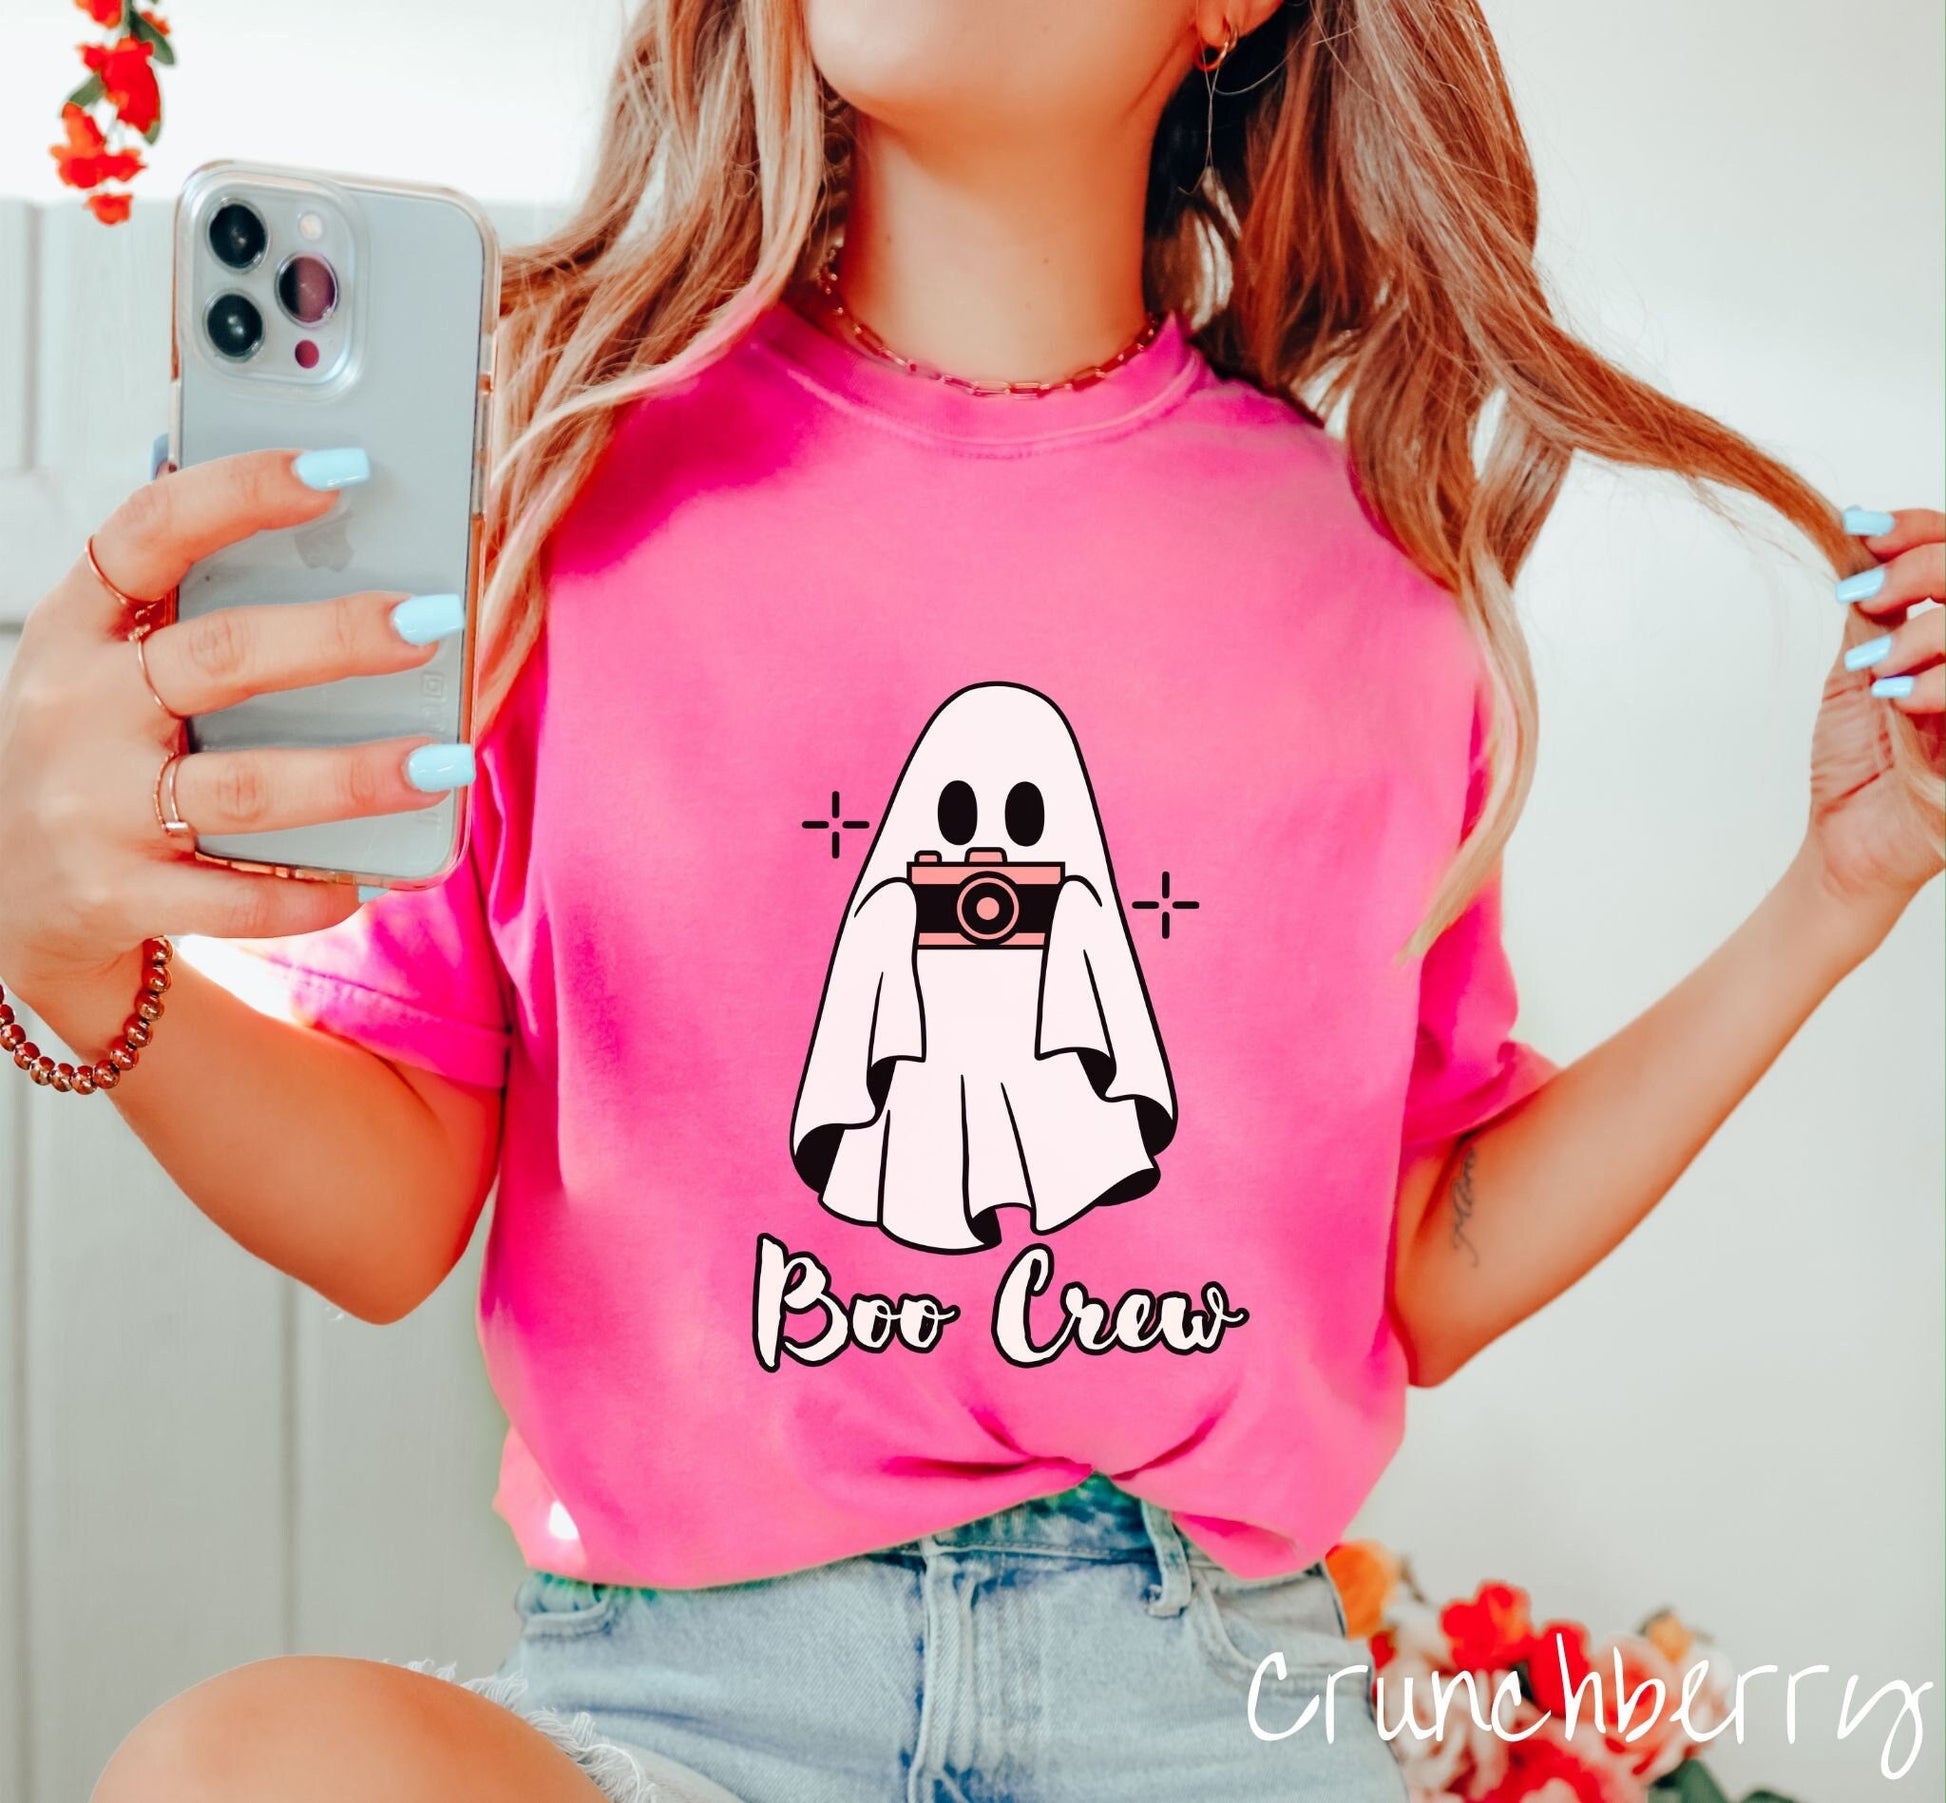 A woman wearing a cute crunchberry colored shirt with the text Boo Crew under a ghost figure holding a camera.